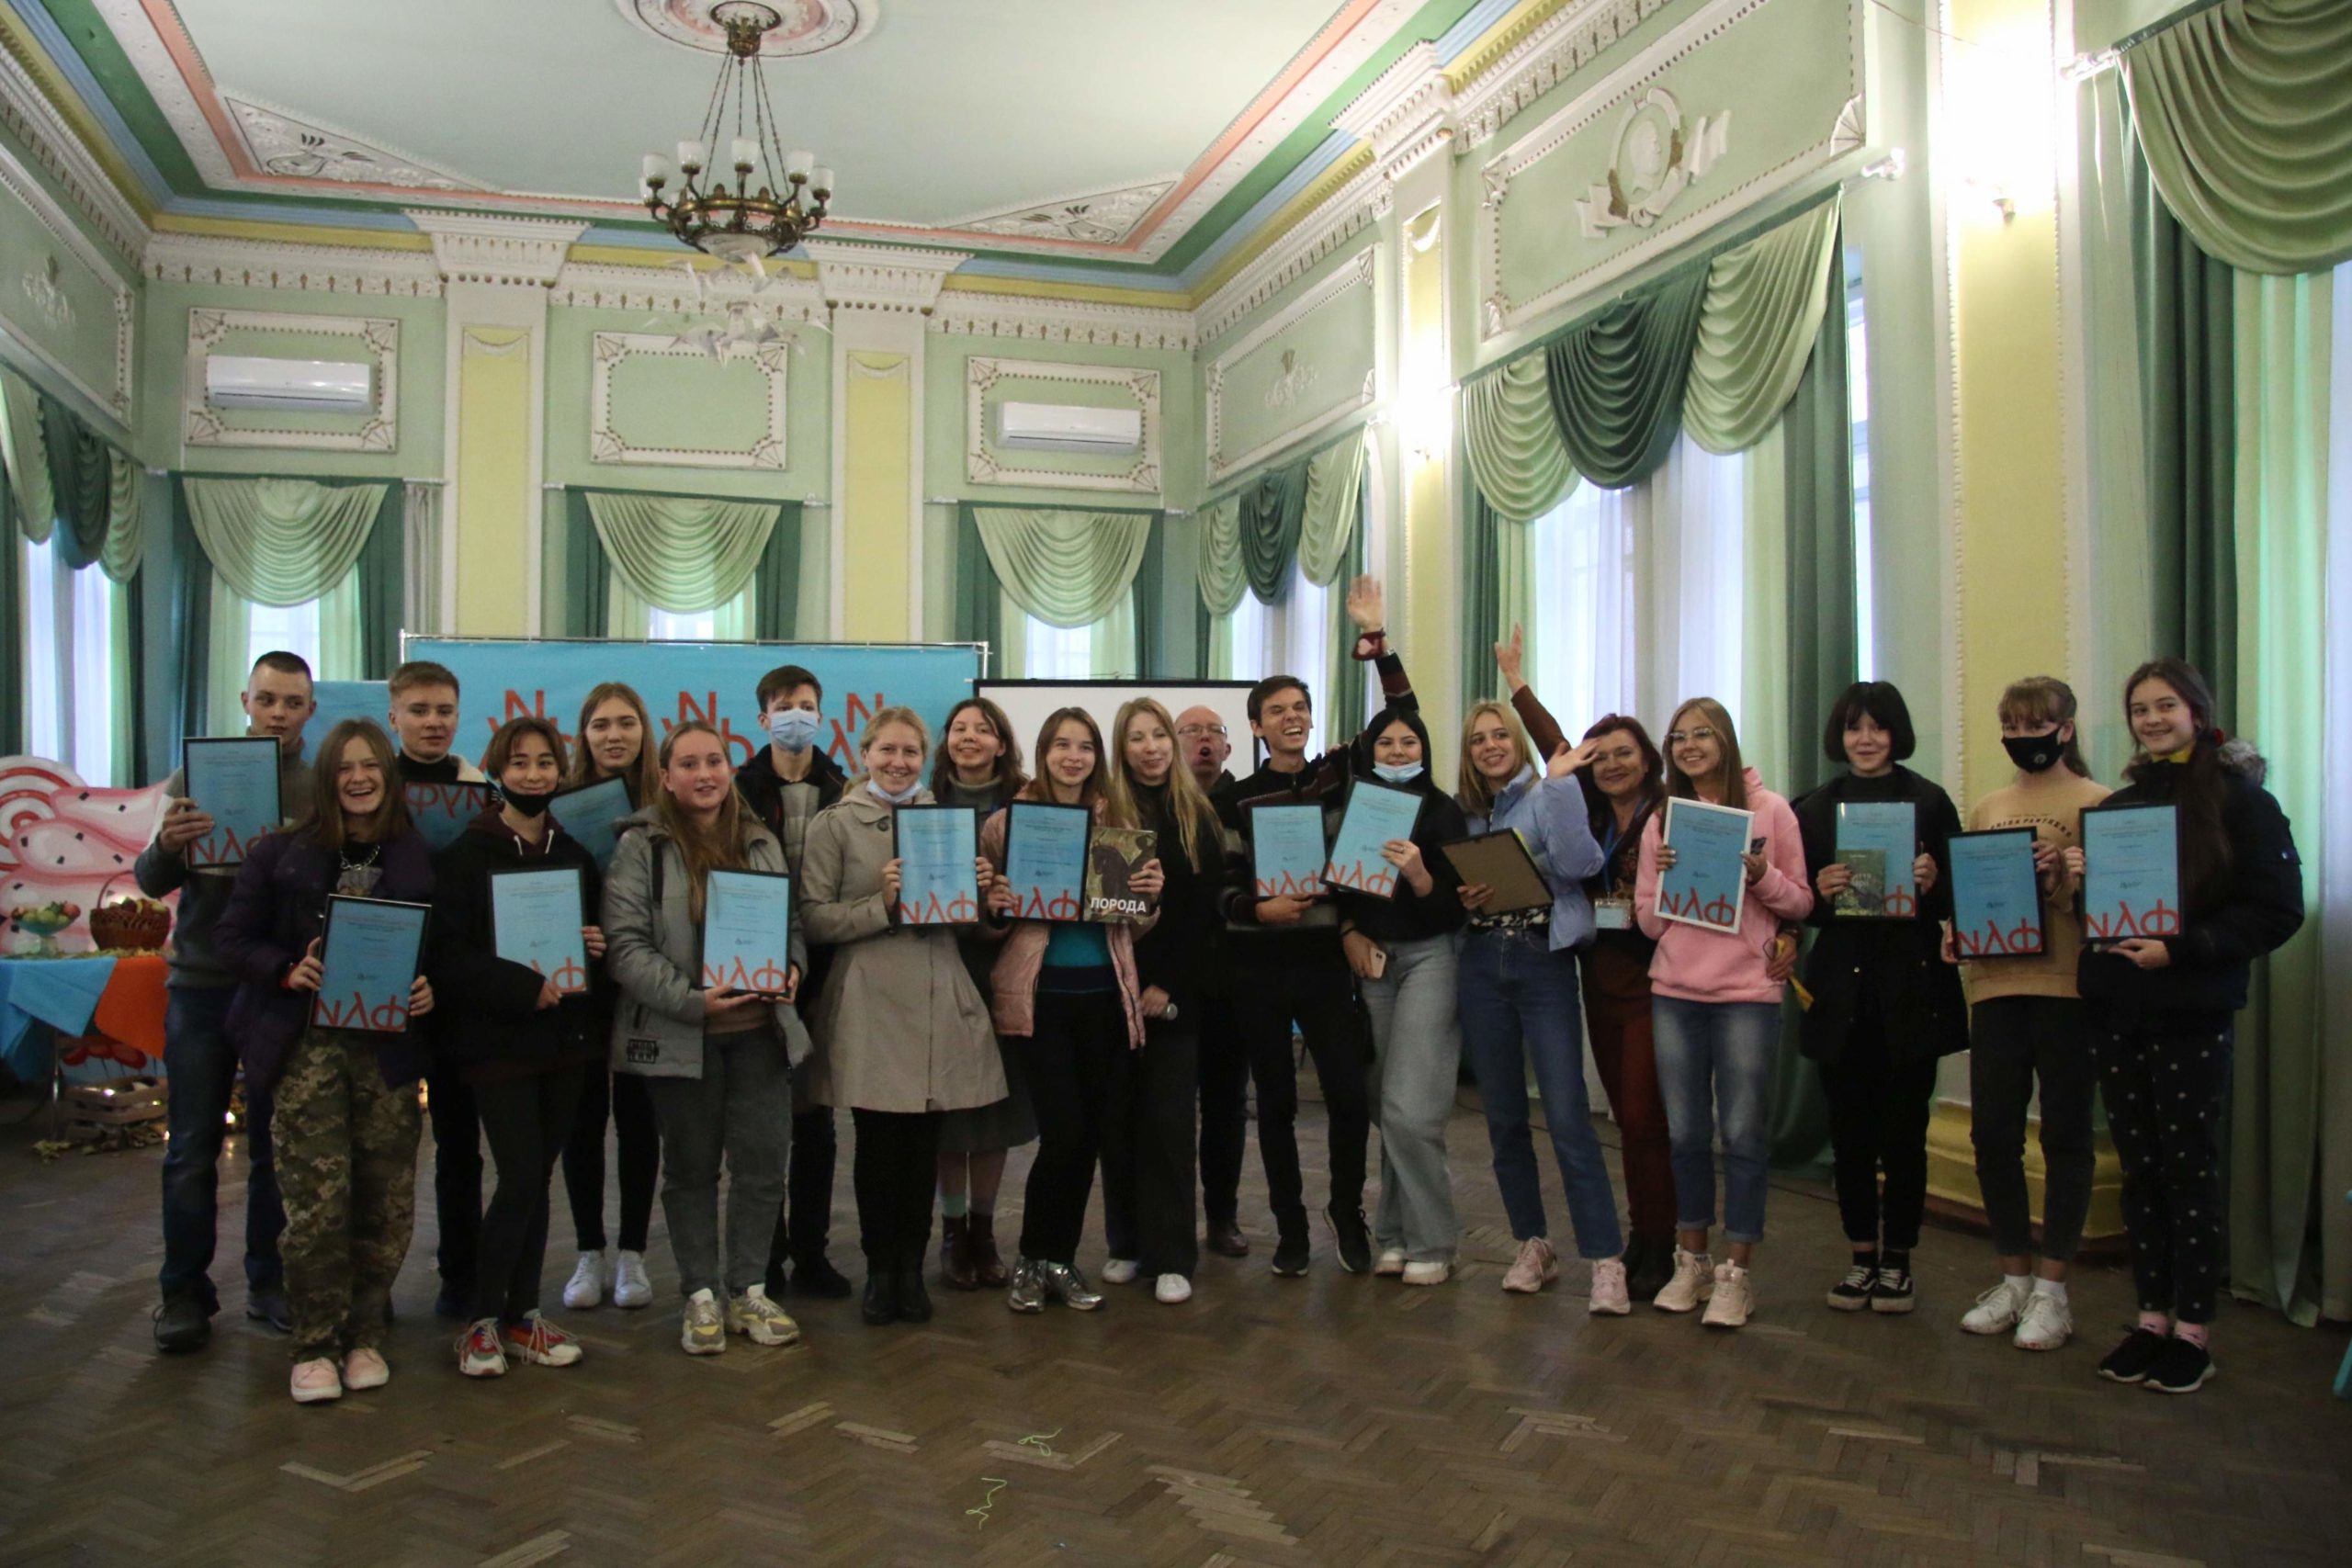 Participants and winners of the essay writing competition at the New York Literary Festival. Photo: Channel 24 ~